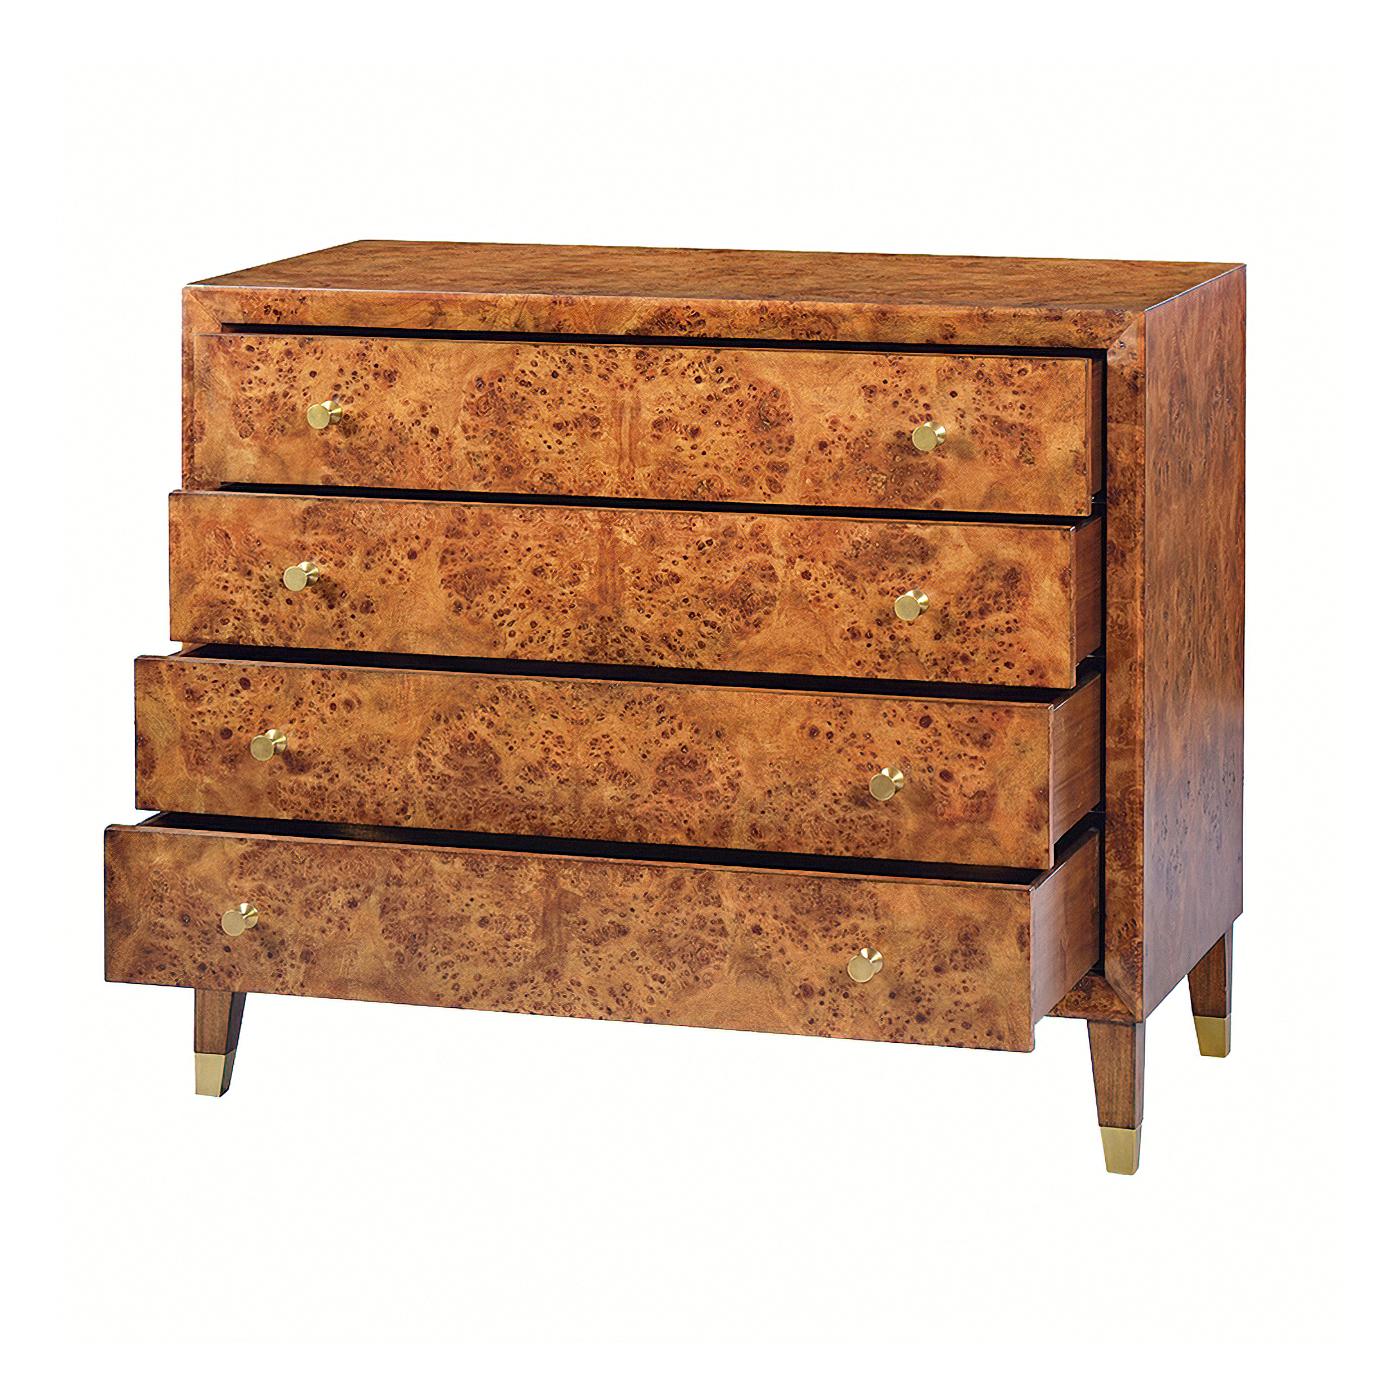 Mid-century style burl dressers with four drawers each with polished brass turned knobs with a hand rubbed warm brown finish with subtle distressing and raised on square tapered legs with brass caps.

Dimensions: 40